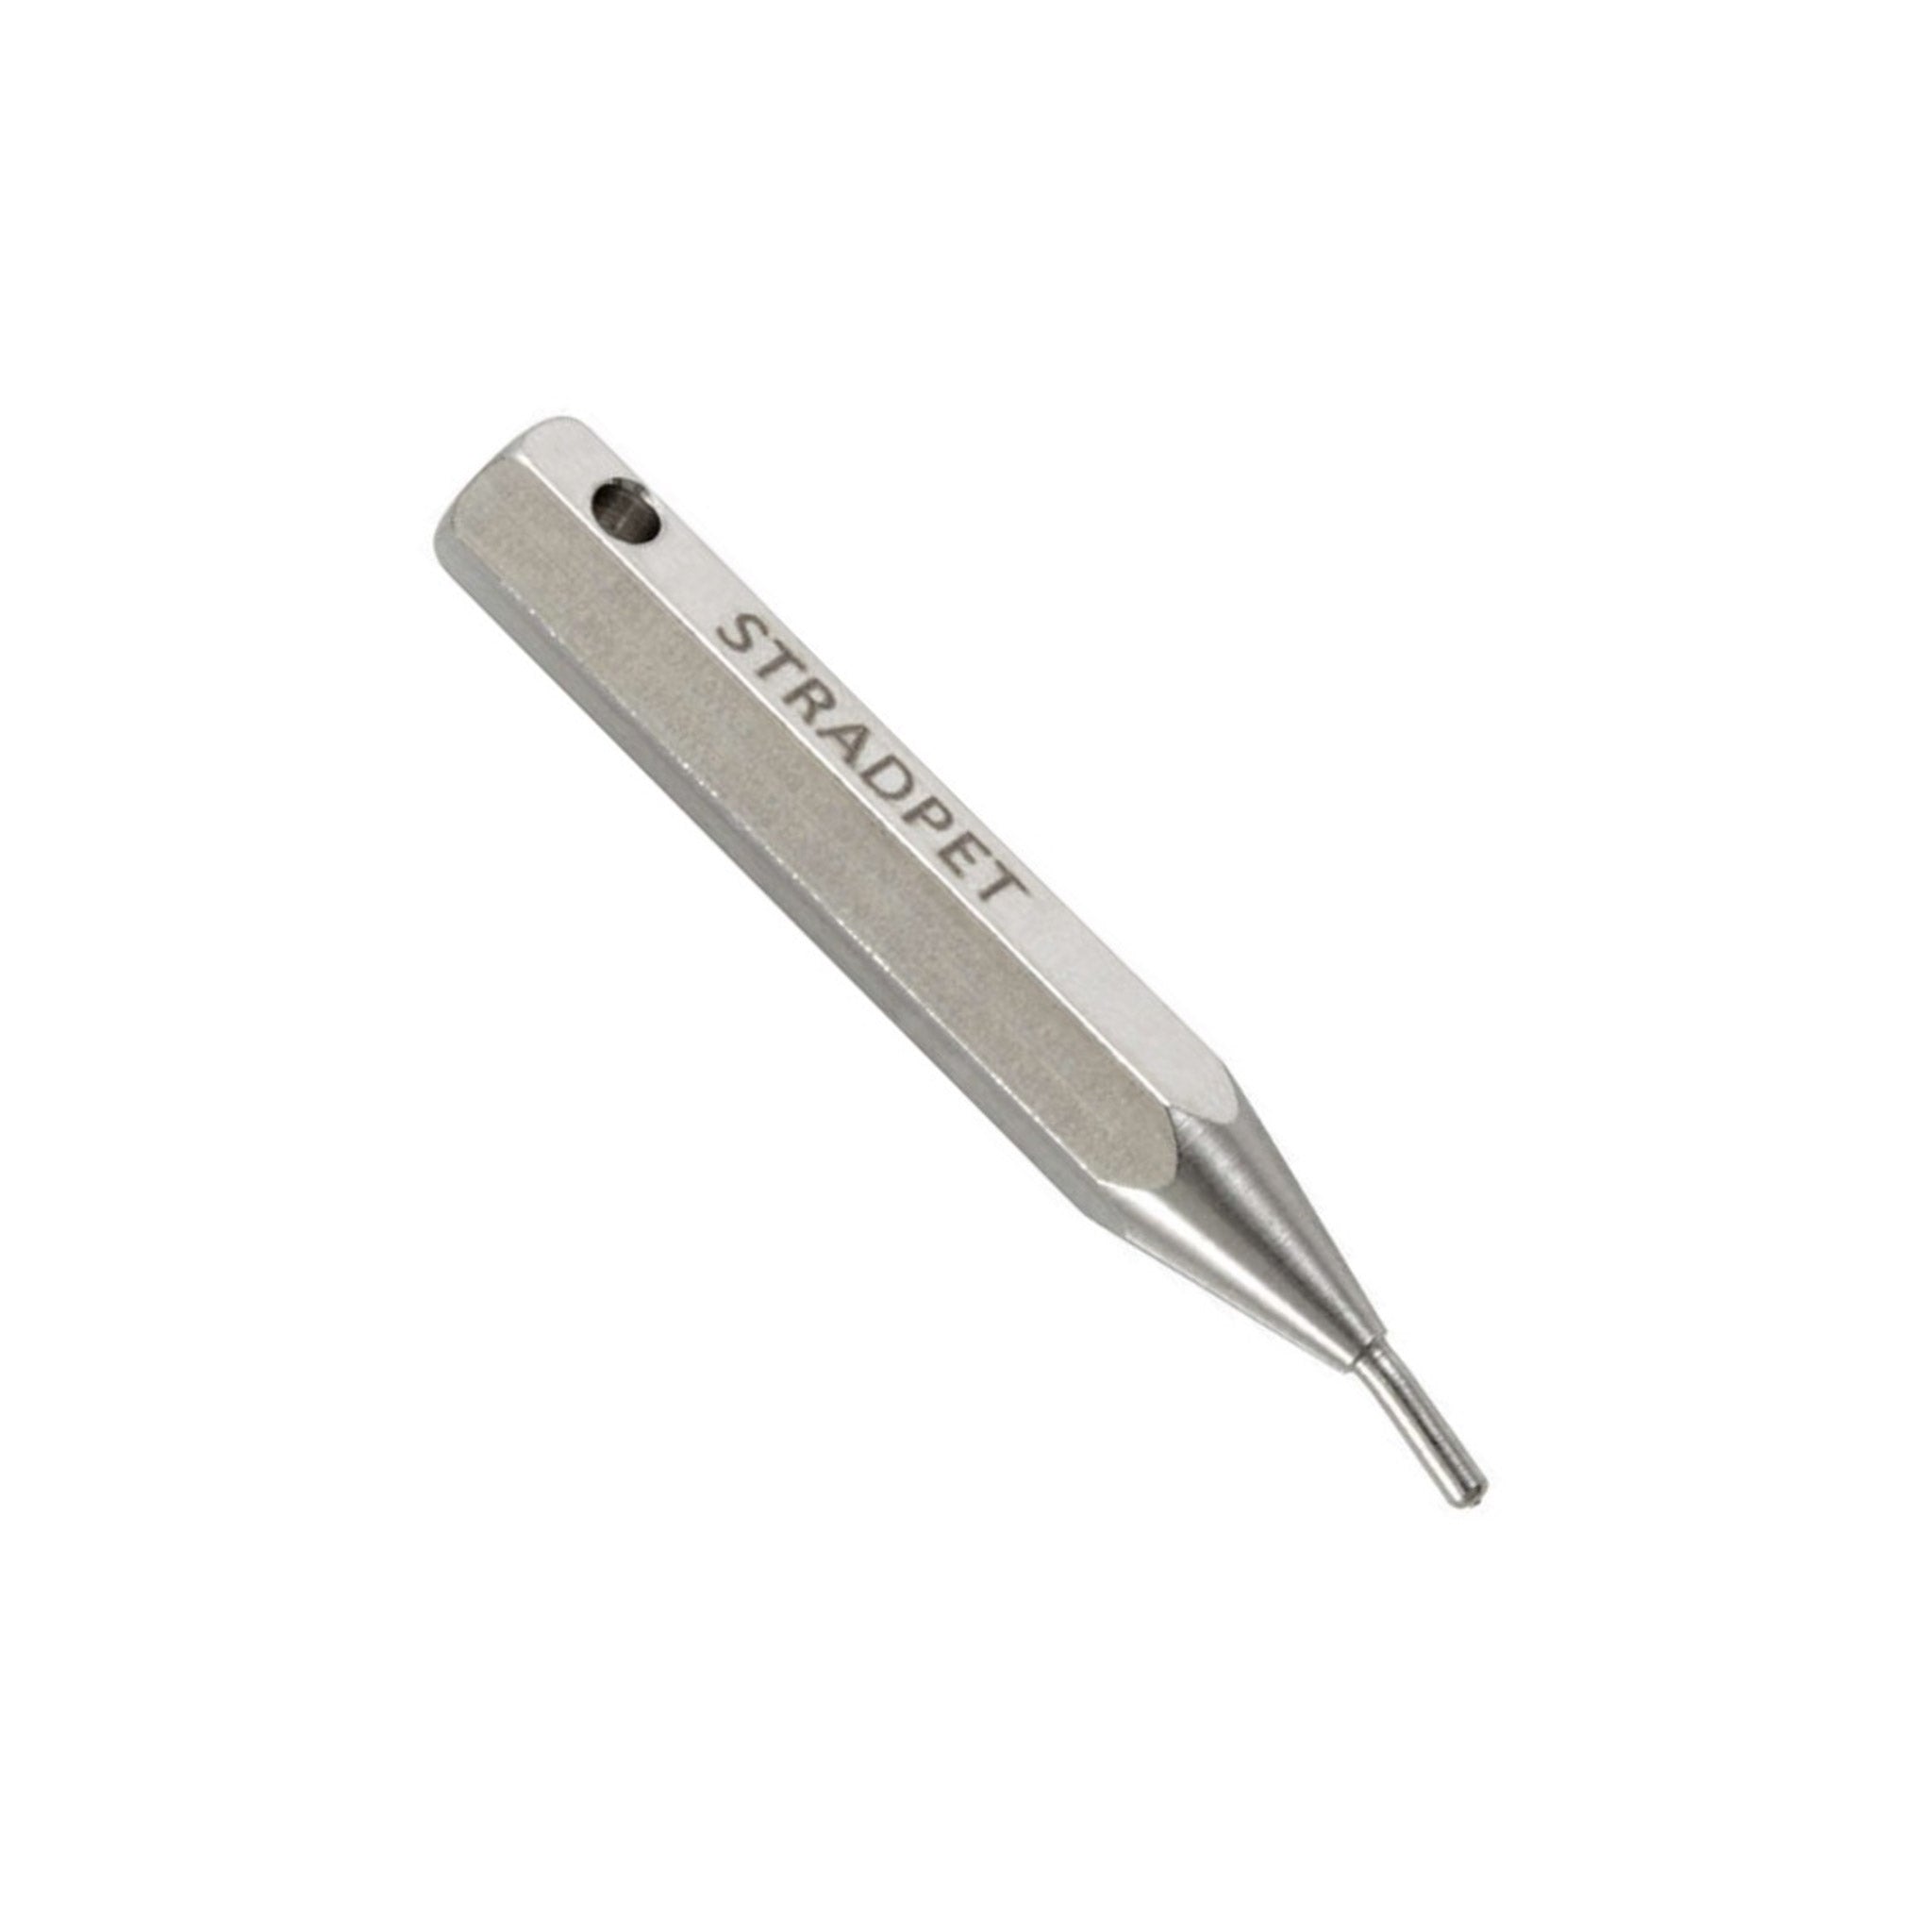 Stradpet Stainless Steel Chinrest Key